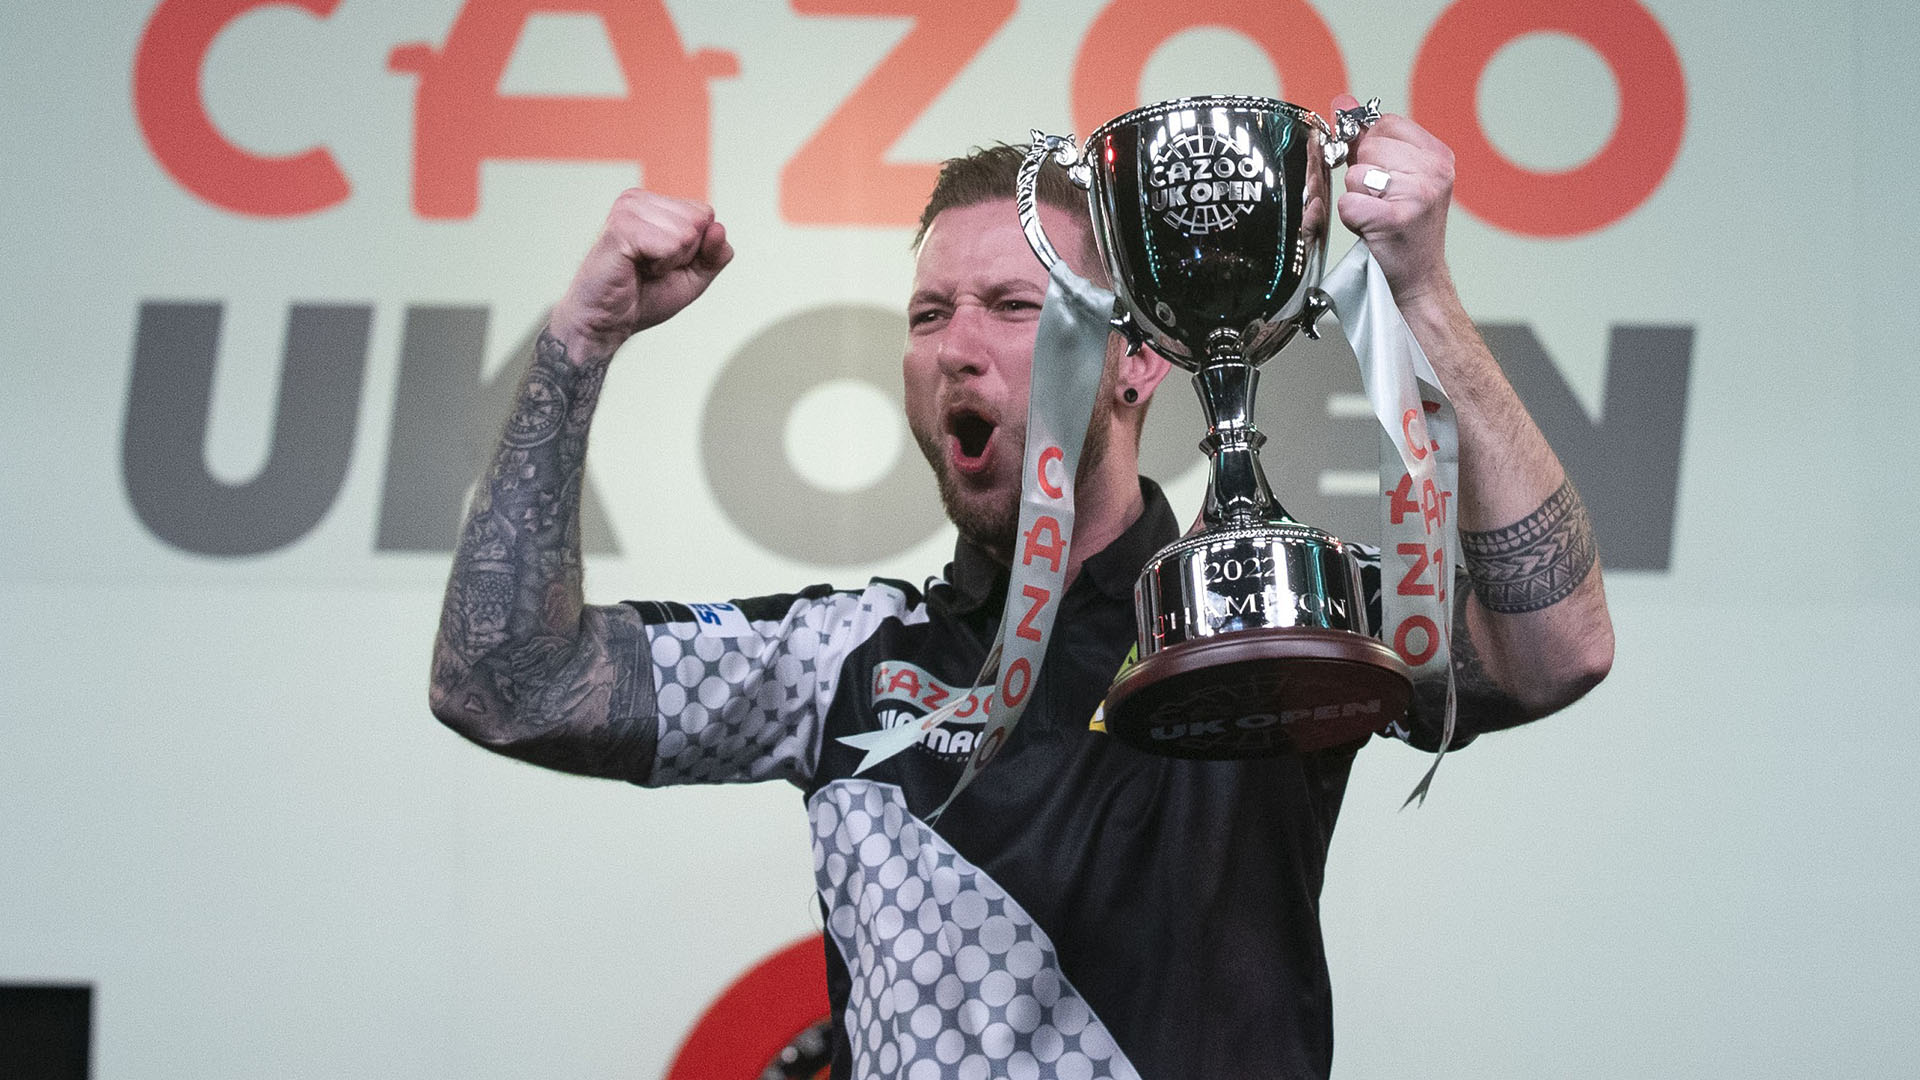 UK Open darts 2022 Draw, schedule, betting odds, results, live ITV4 coverage and tickets